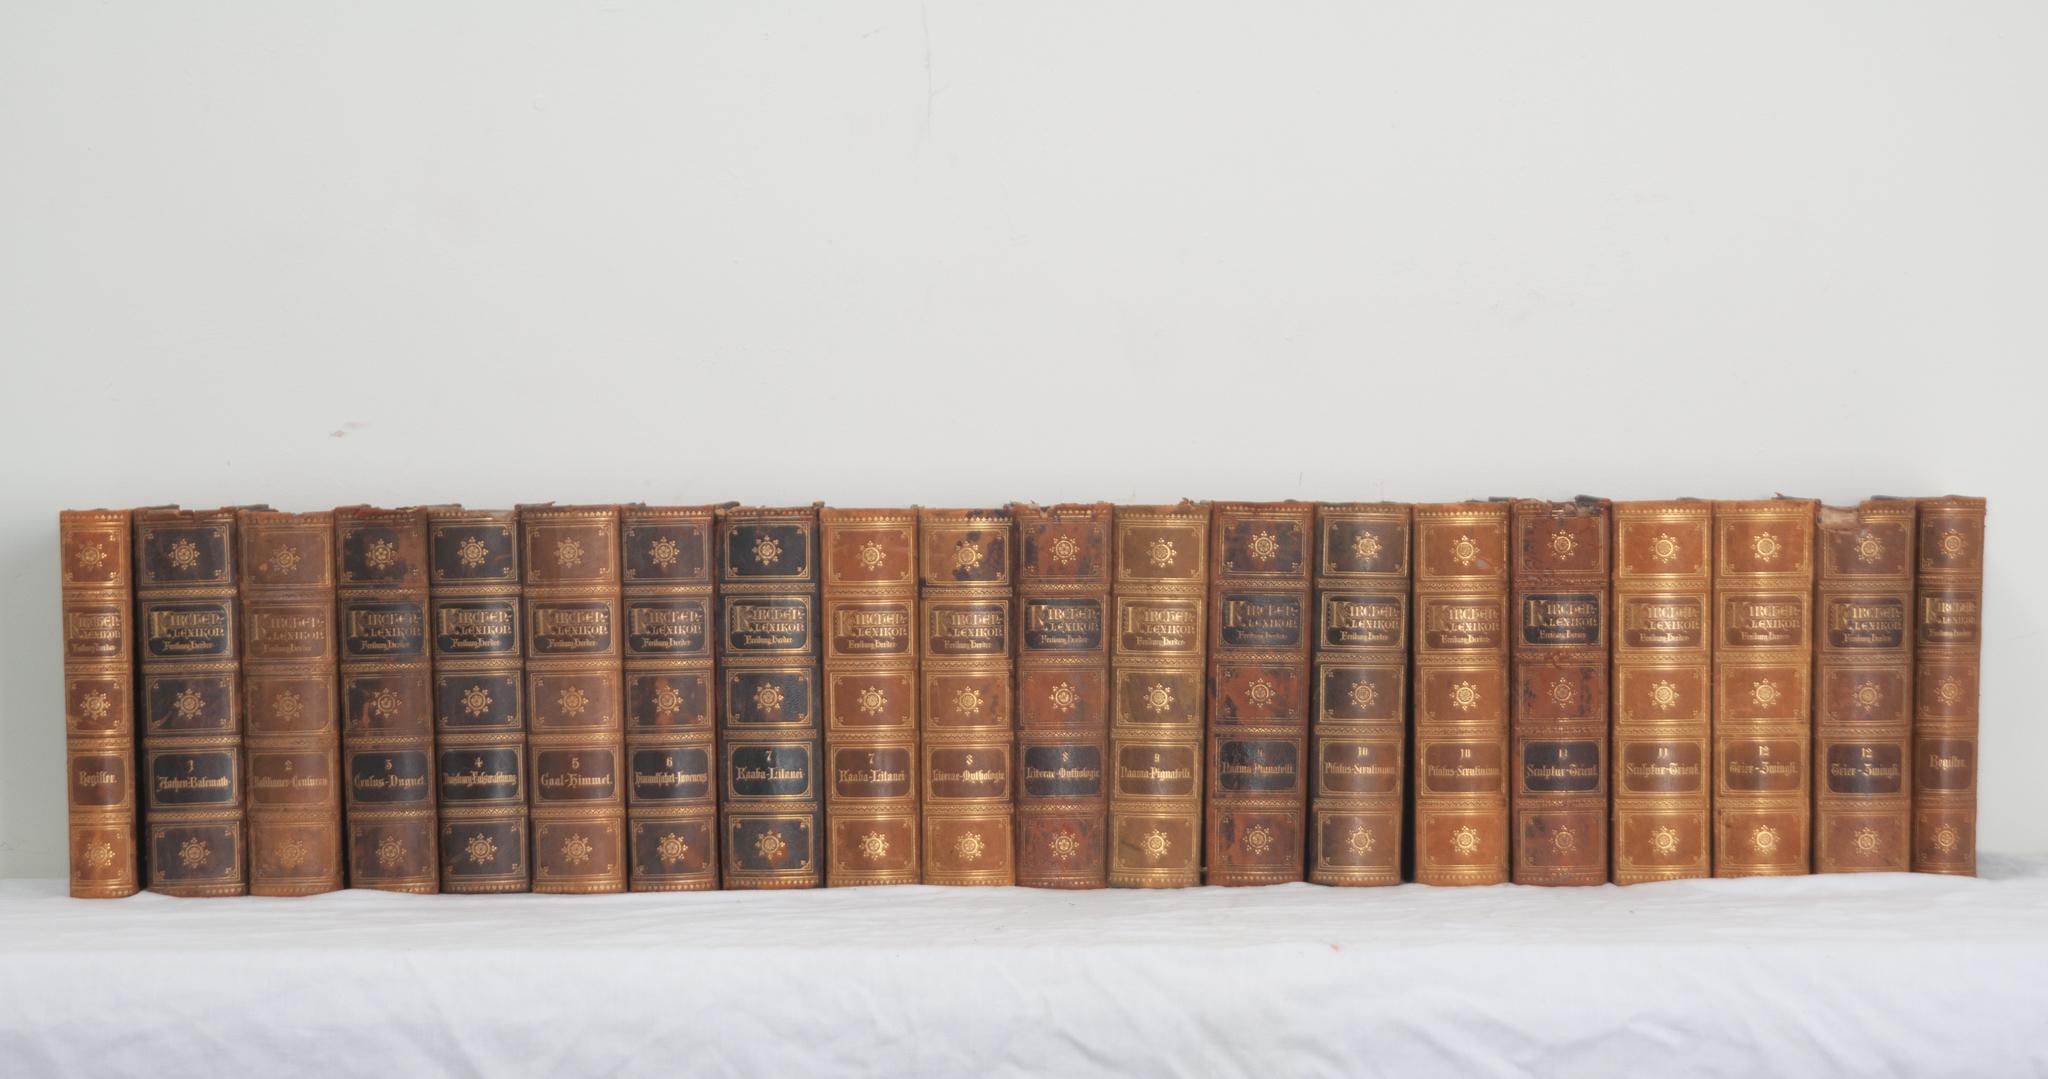 A collection of twenty volumes of a Catholic encyclopedia by German authors Joseph Cardinal Hergenröther and Dr. Franz Kaulen. This set is leather bound with gold tooling stamped with the title and respective volume. Written in 1882-1903, the set